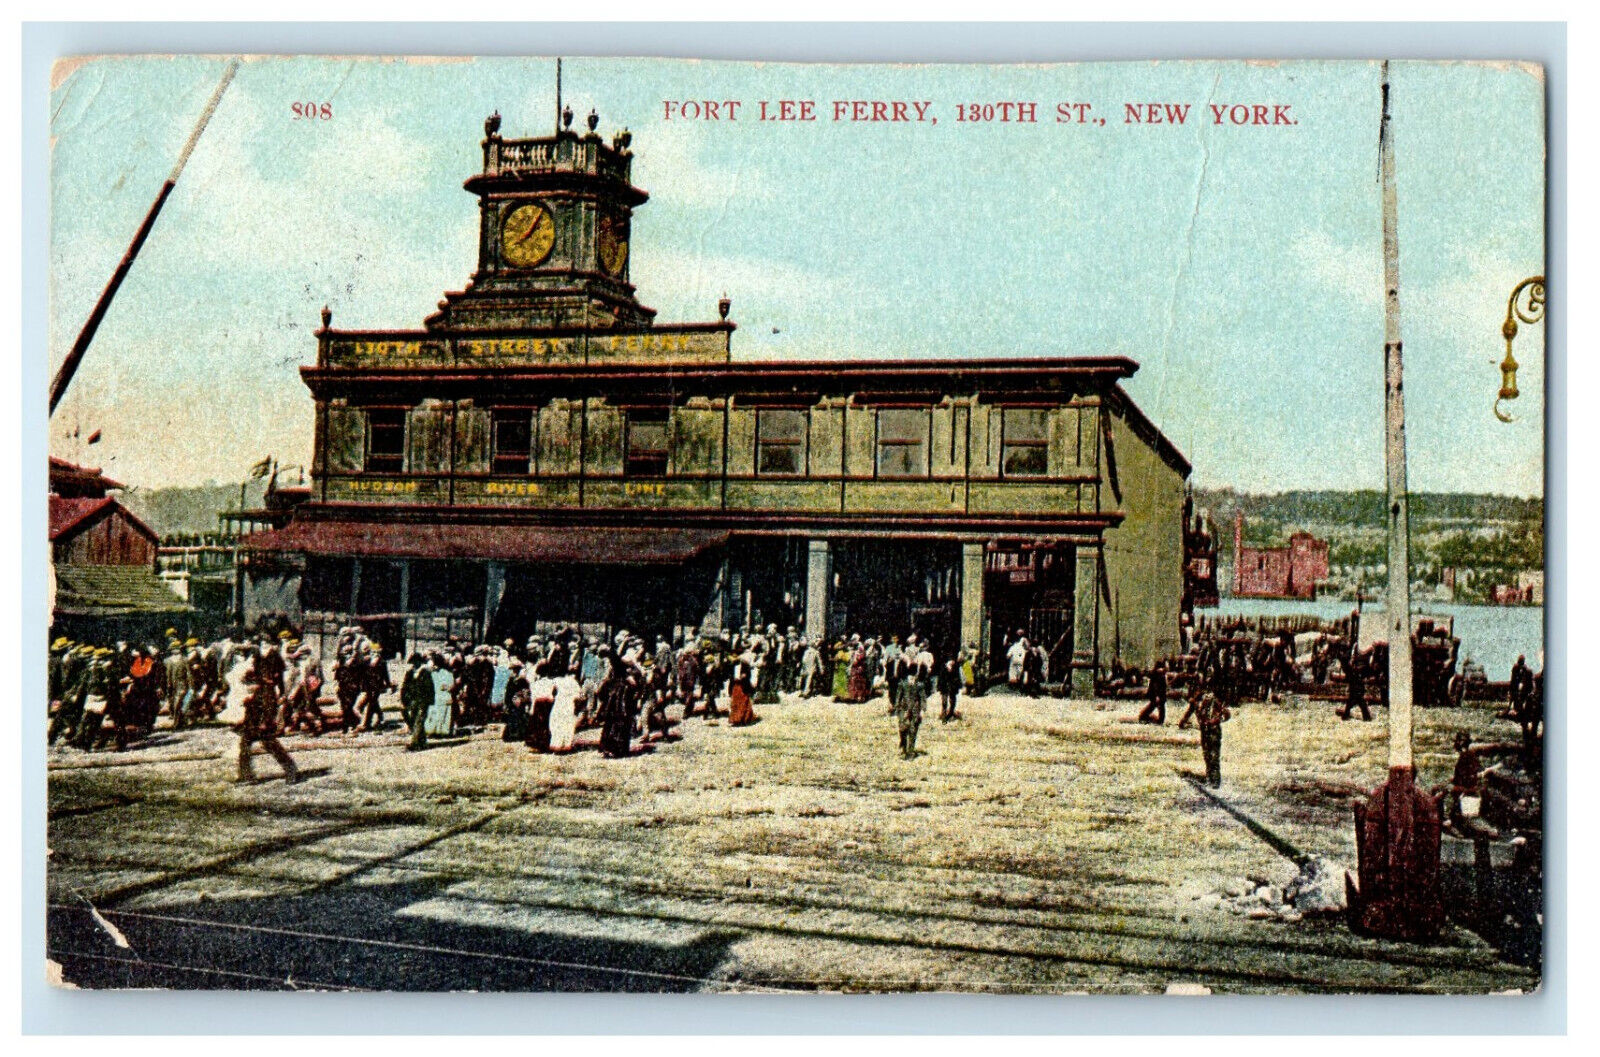 c1905 Fort Lee Ferry, 130th Street Buildings US NY Posted Postcard